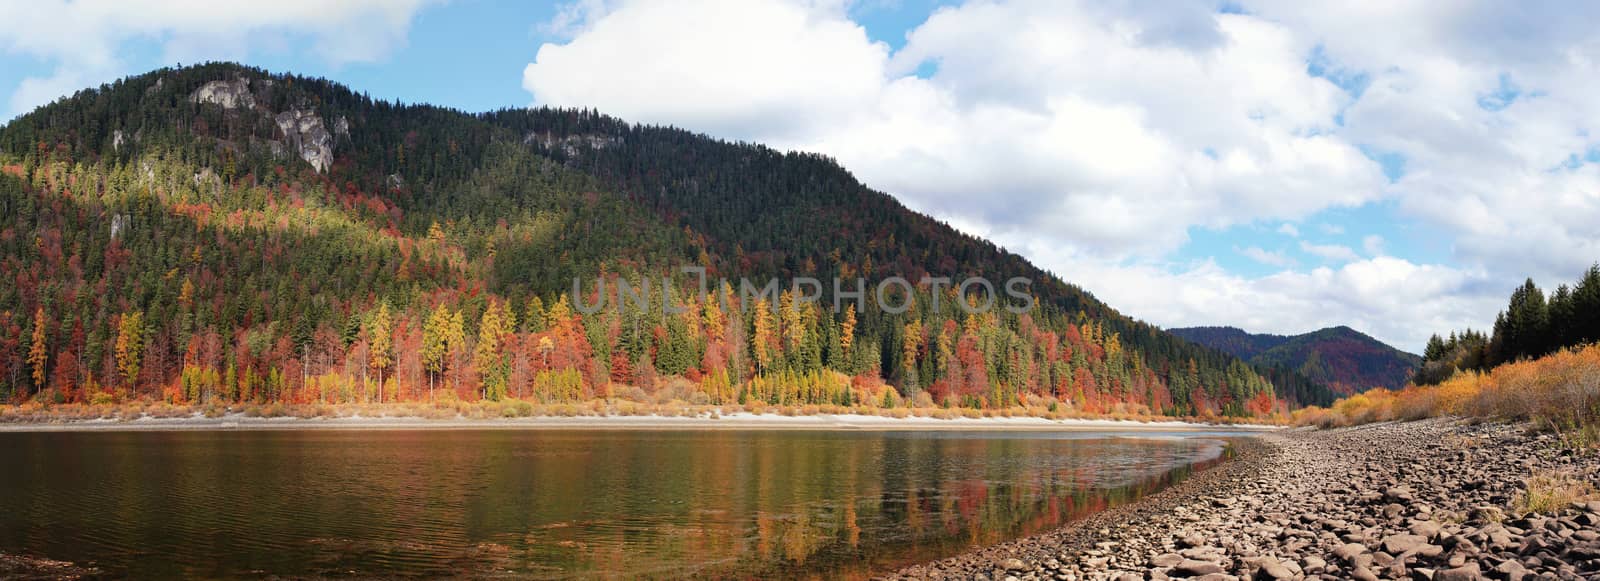 Calm lake with low water - round stones at shore visible, autumn coloured coniferous trees on other side, blue sky above.